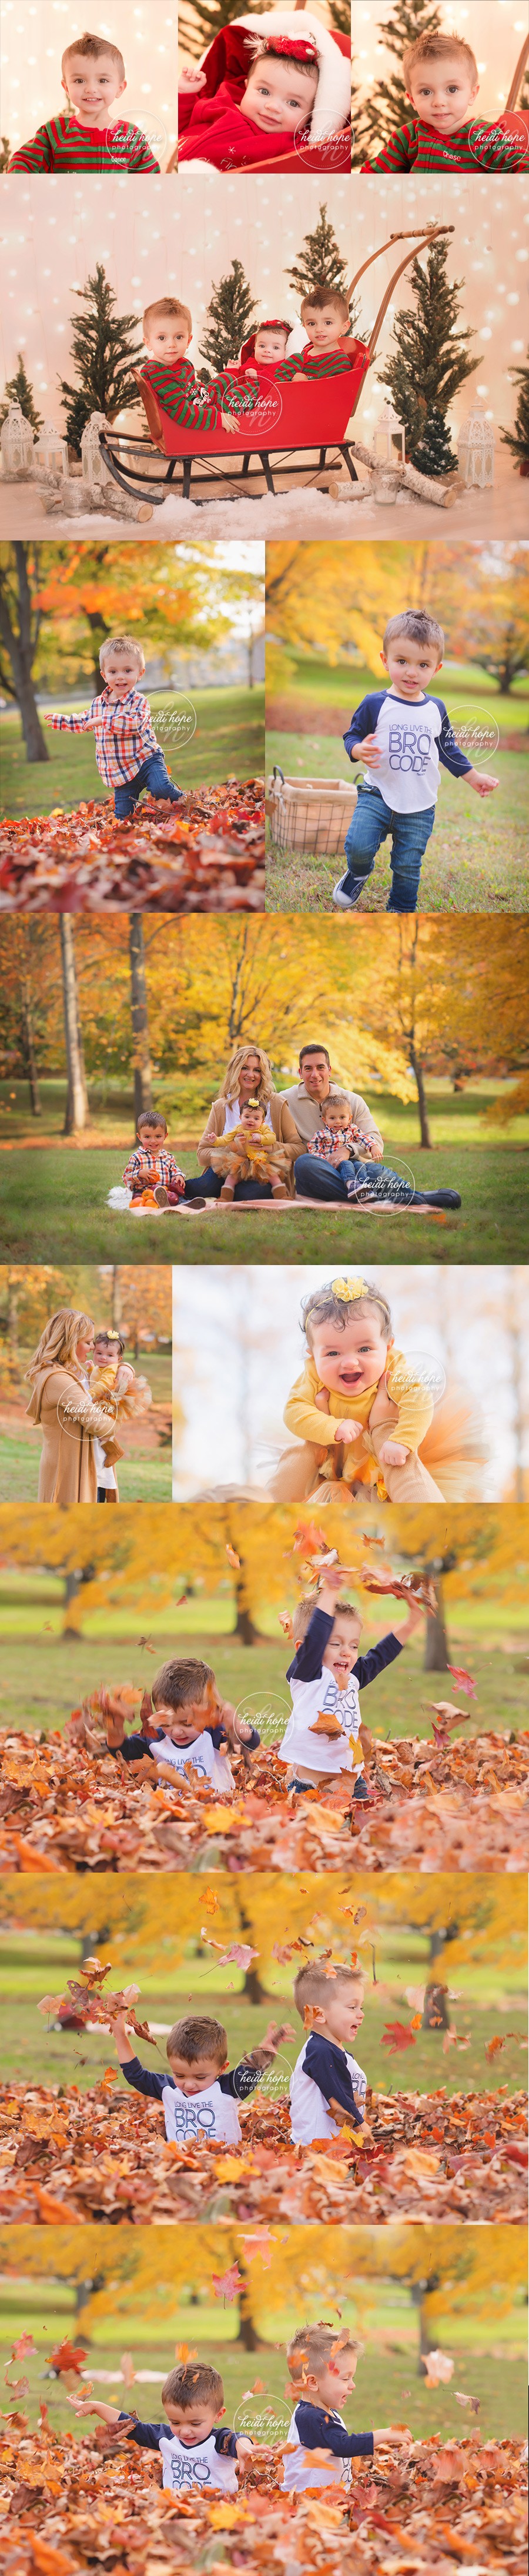 holiday-christmas-portraits-and-outdoor-fall-foliage-photography-session